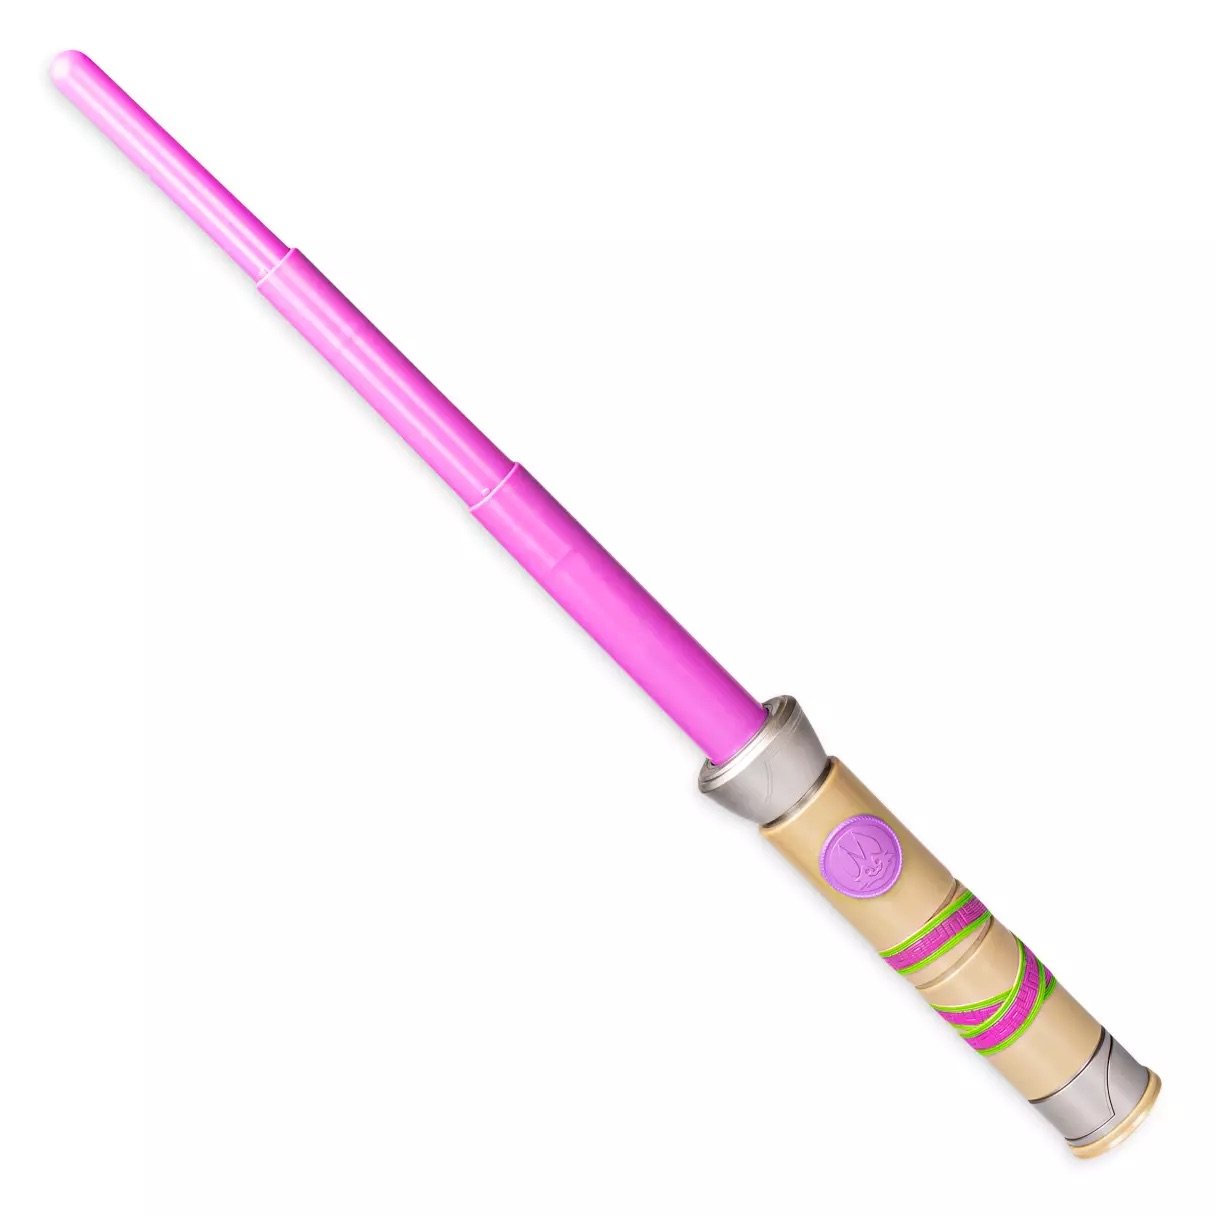 Lys Solay Training LIGHTSABER Toy